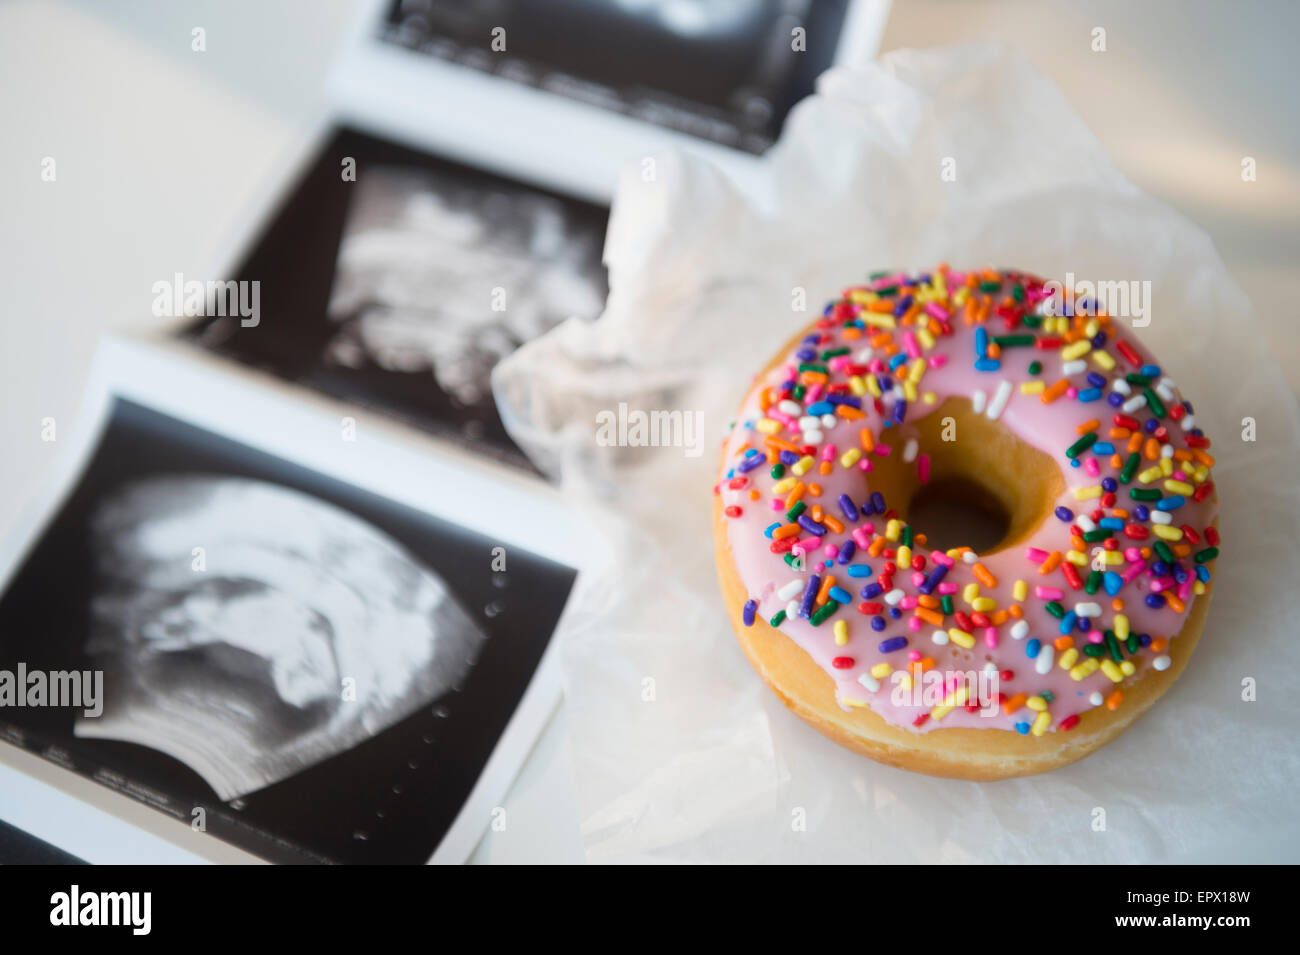 Ultrasound picture and donut Stock Photo